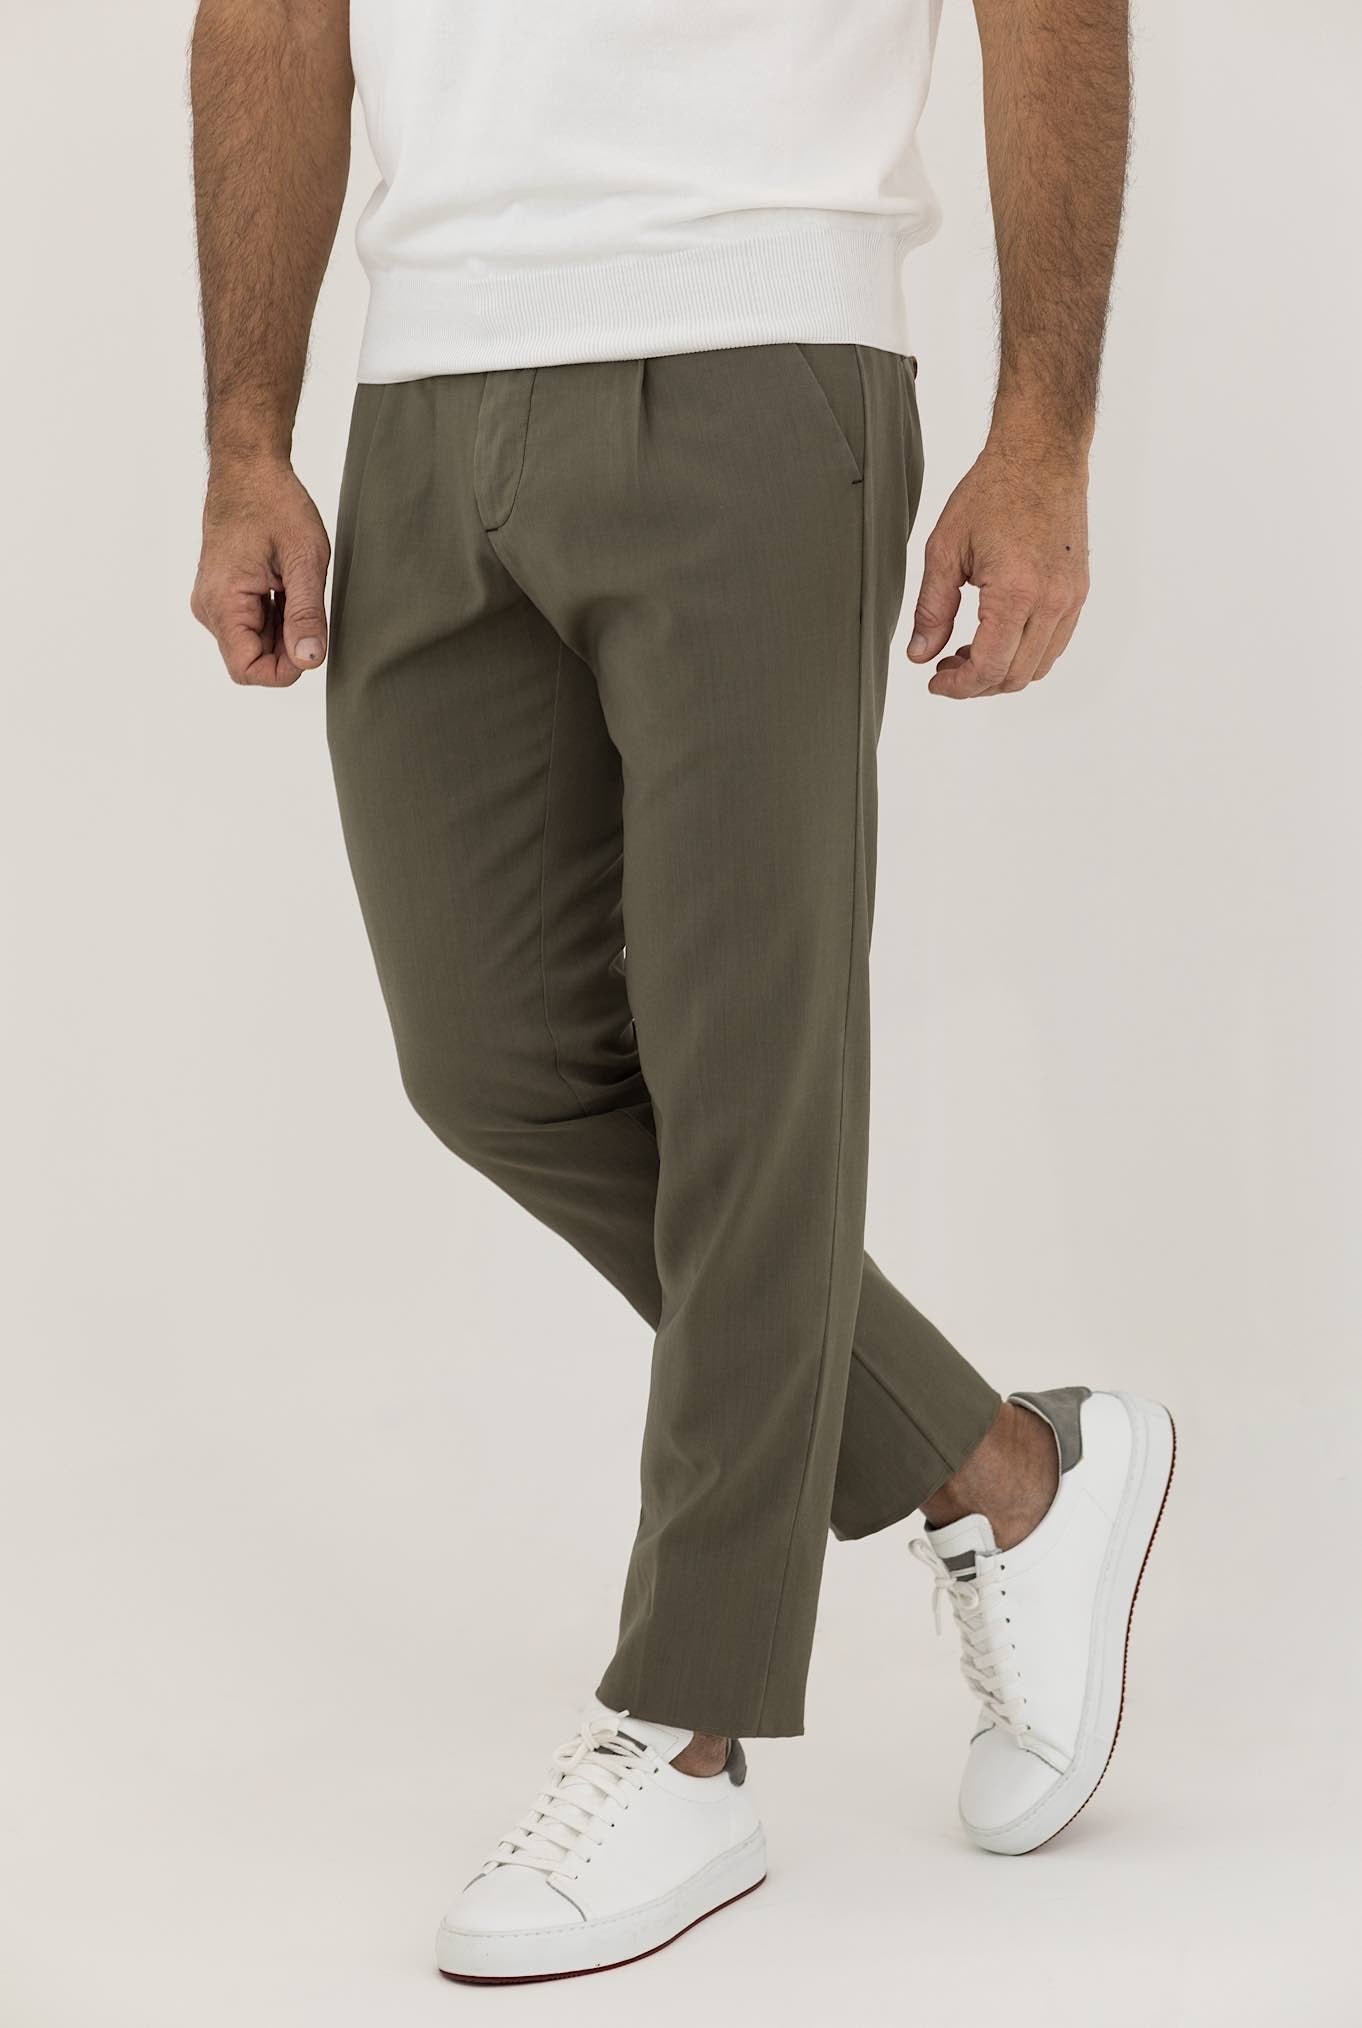 MYTHS Fresco Wool Trousers with Sage Green Pleats